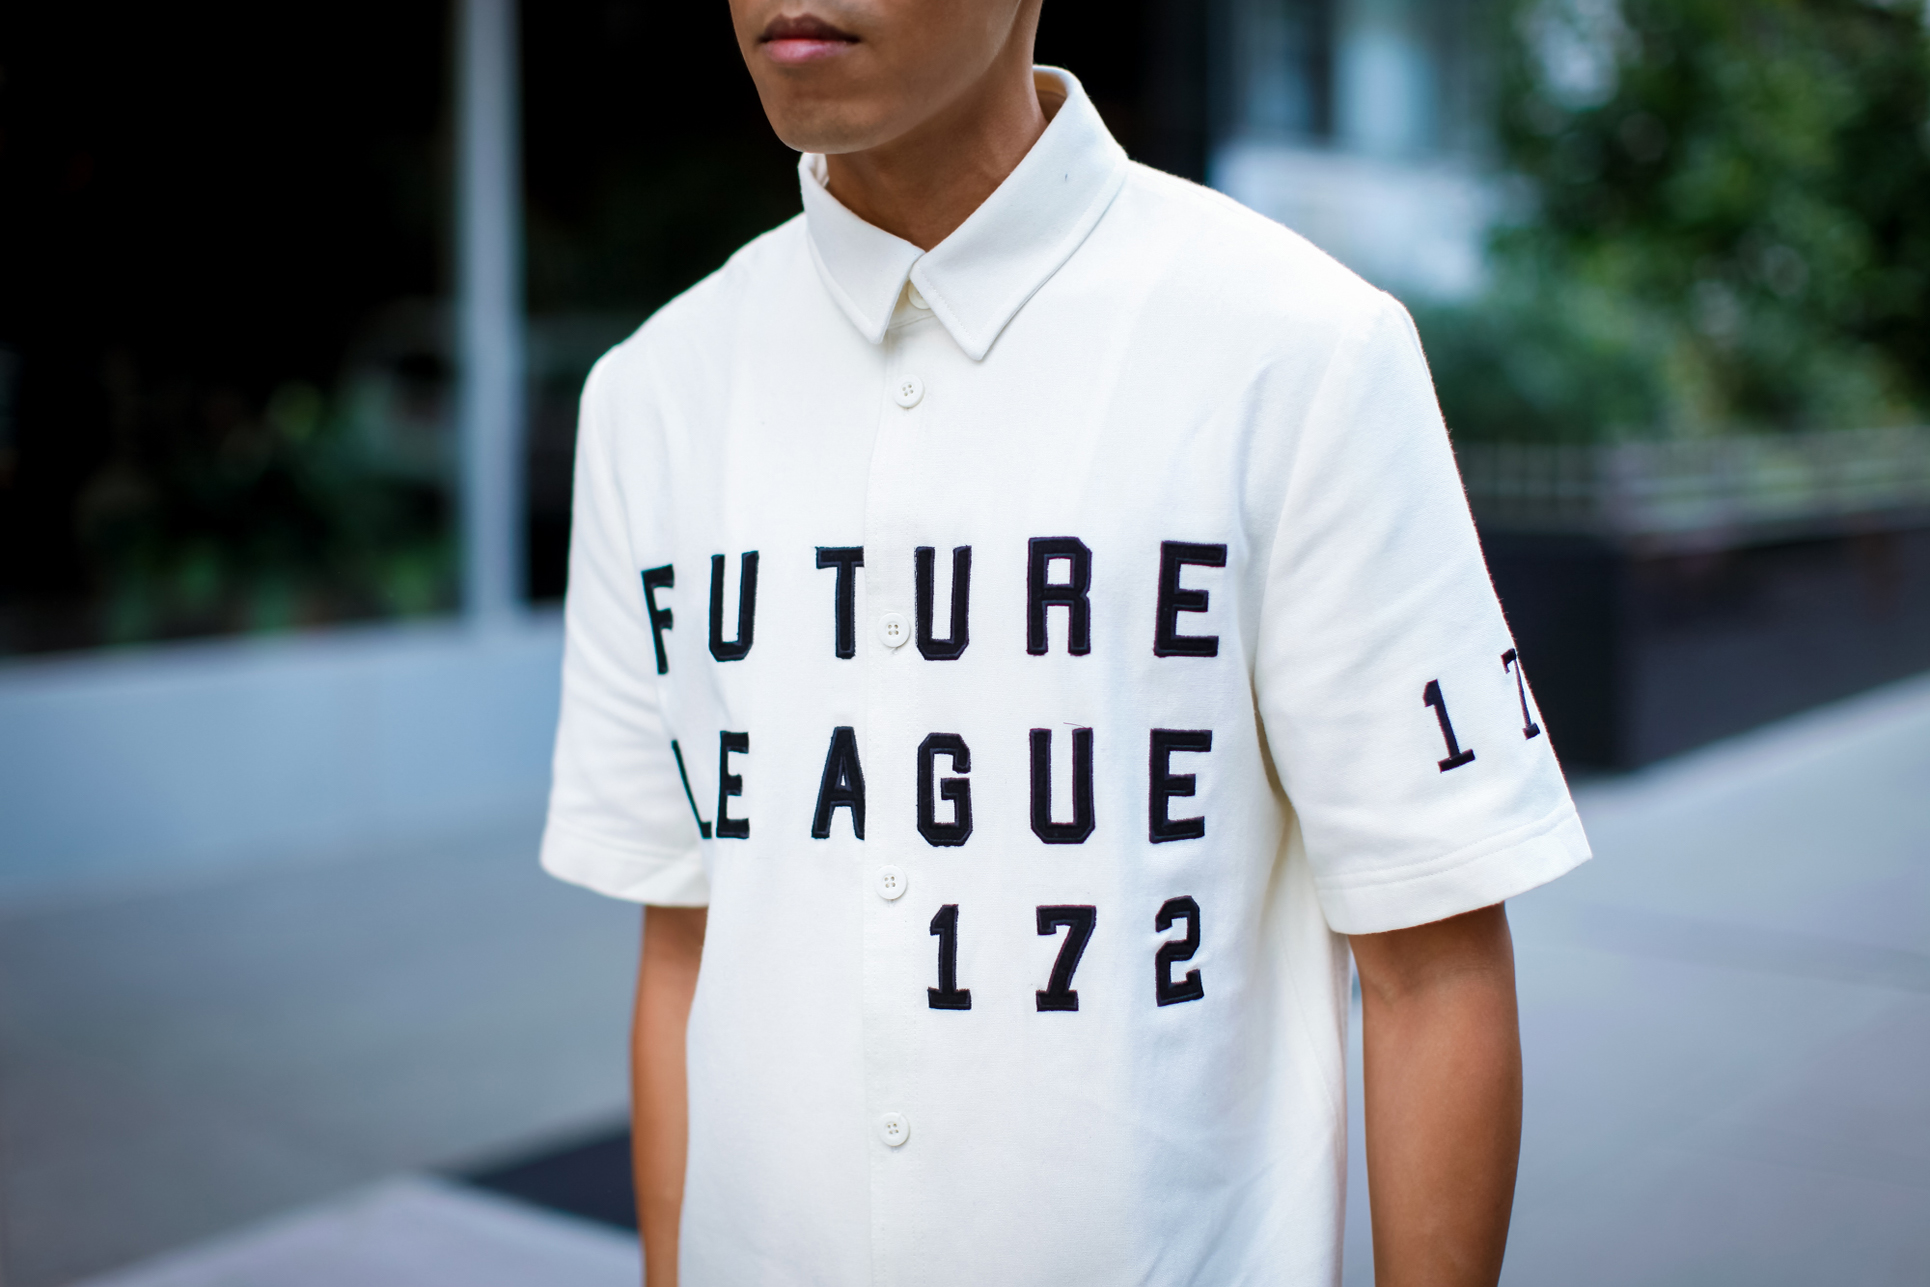 oh anthonio - Anthony Urbano - men's streetwear outfit I Love Ugly Puma x Stampd